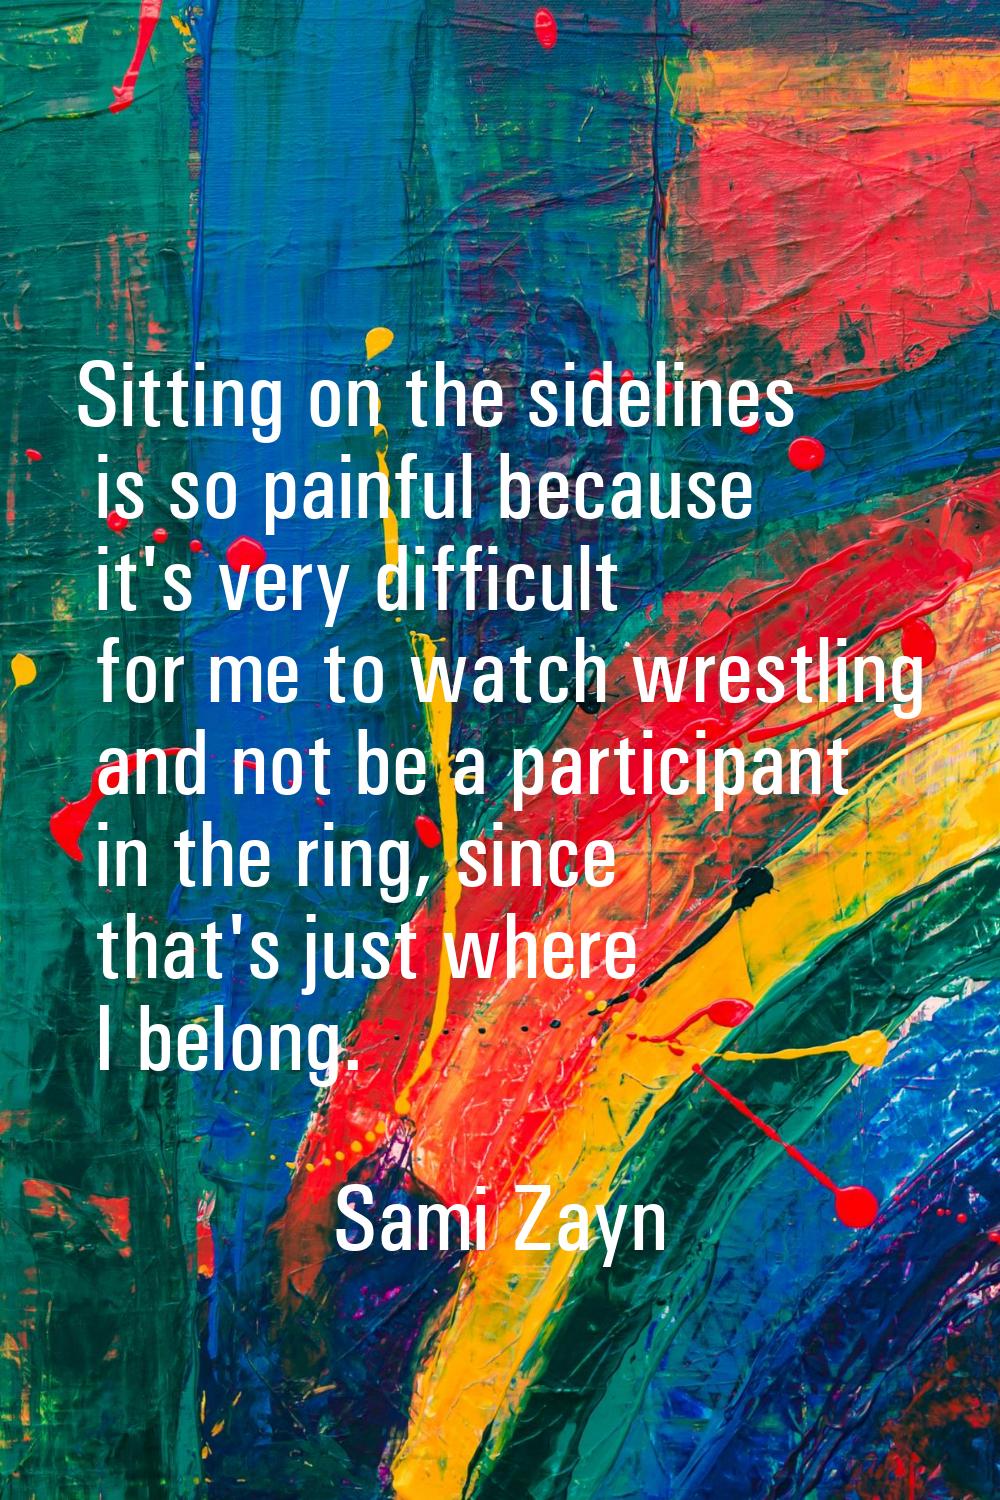 Sitting on the sidelines is so painful because it's very difficult for me to watch wrestling and no